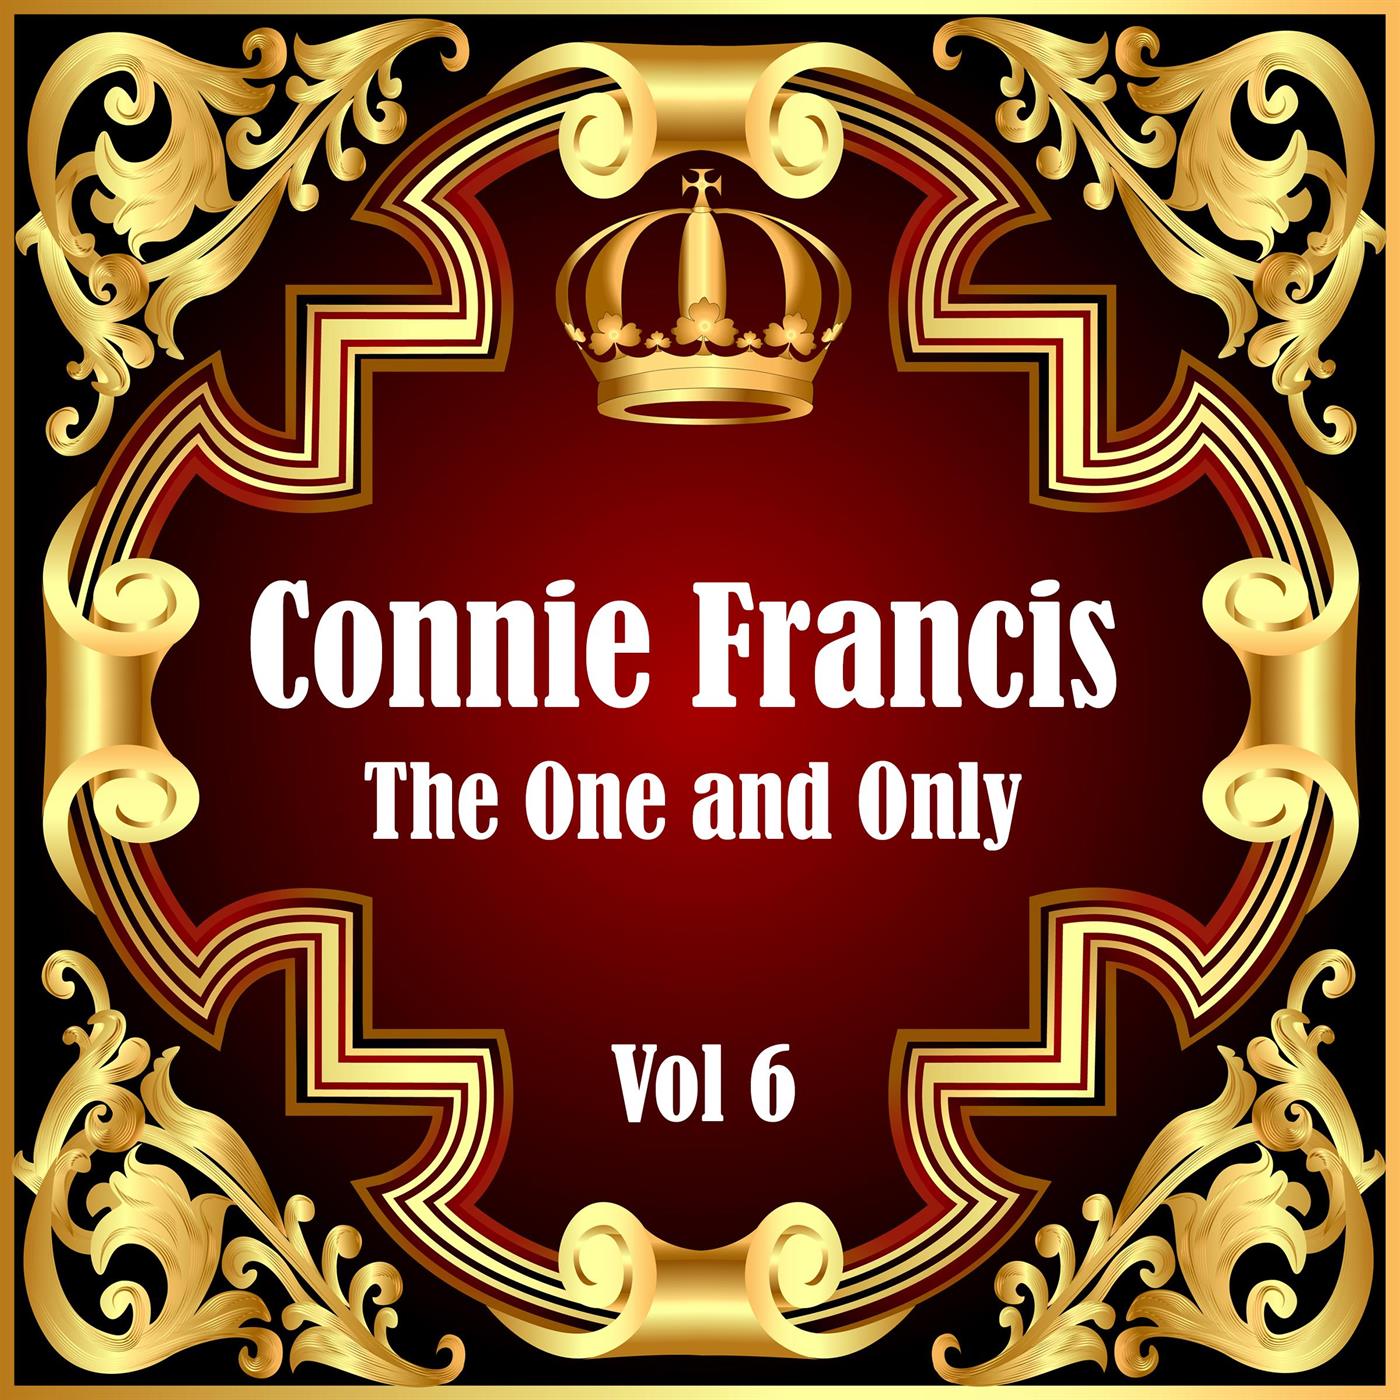 Connie Francis: The One and Only Vol 6